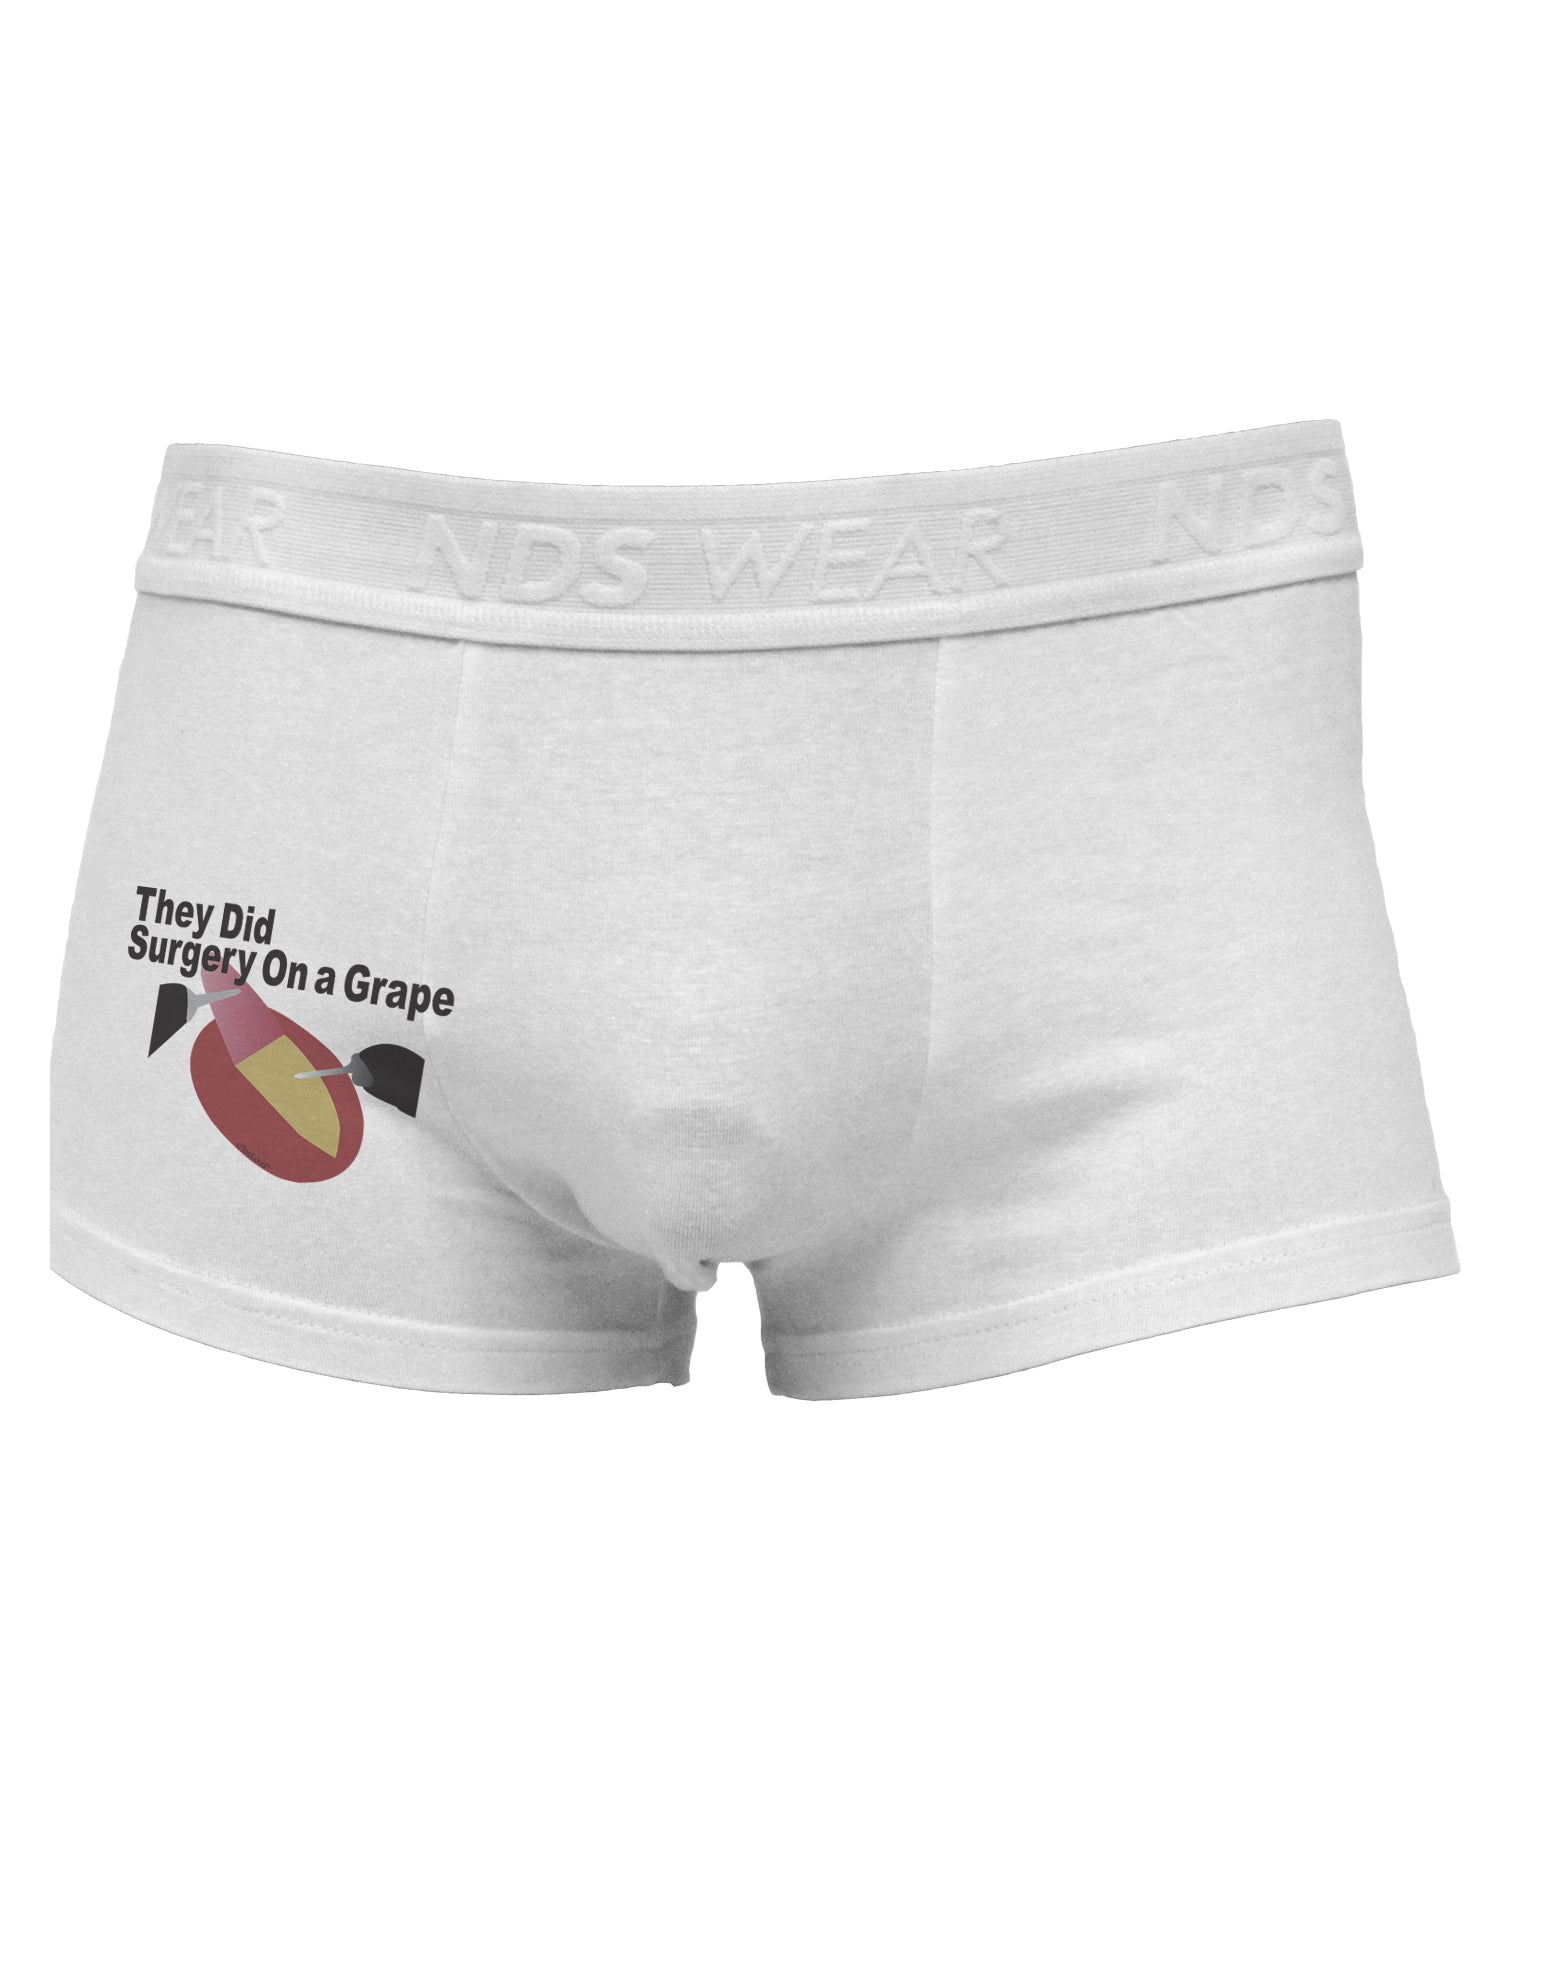 They Did Surgery On a Grape Side Printed Mens Trunk Underwear by TooLo -  Davson Sales